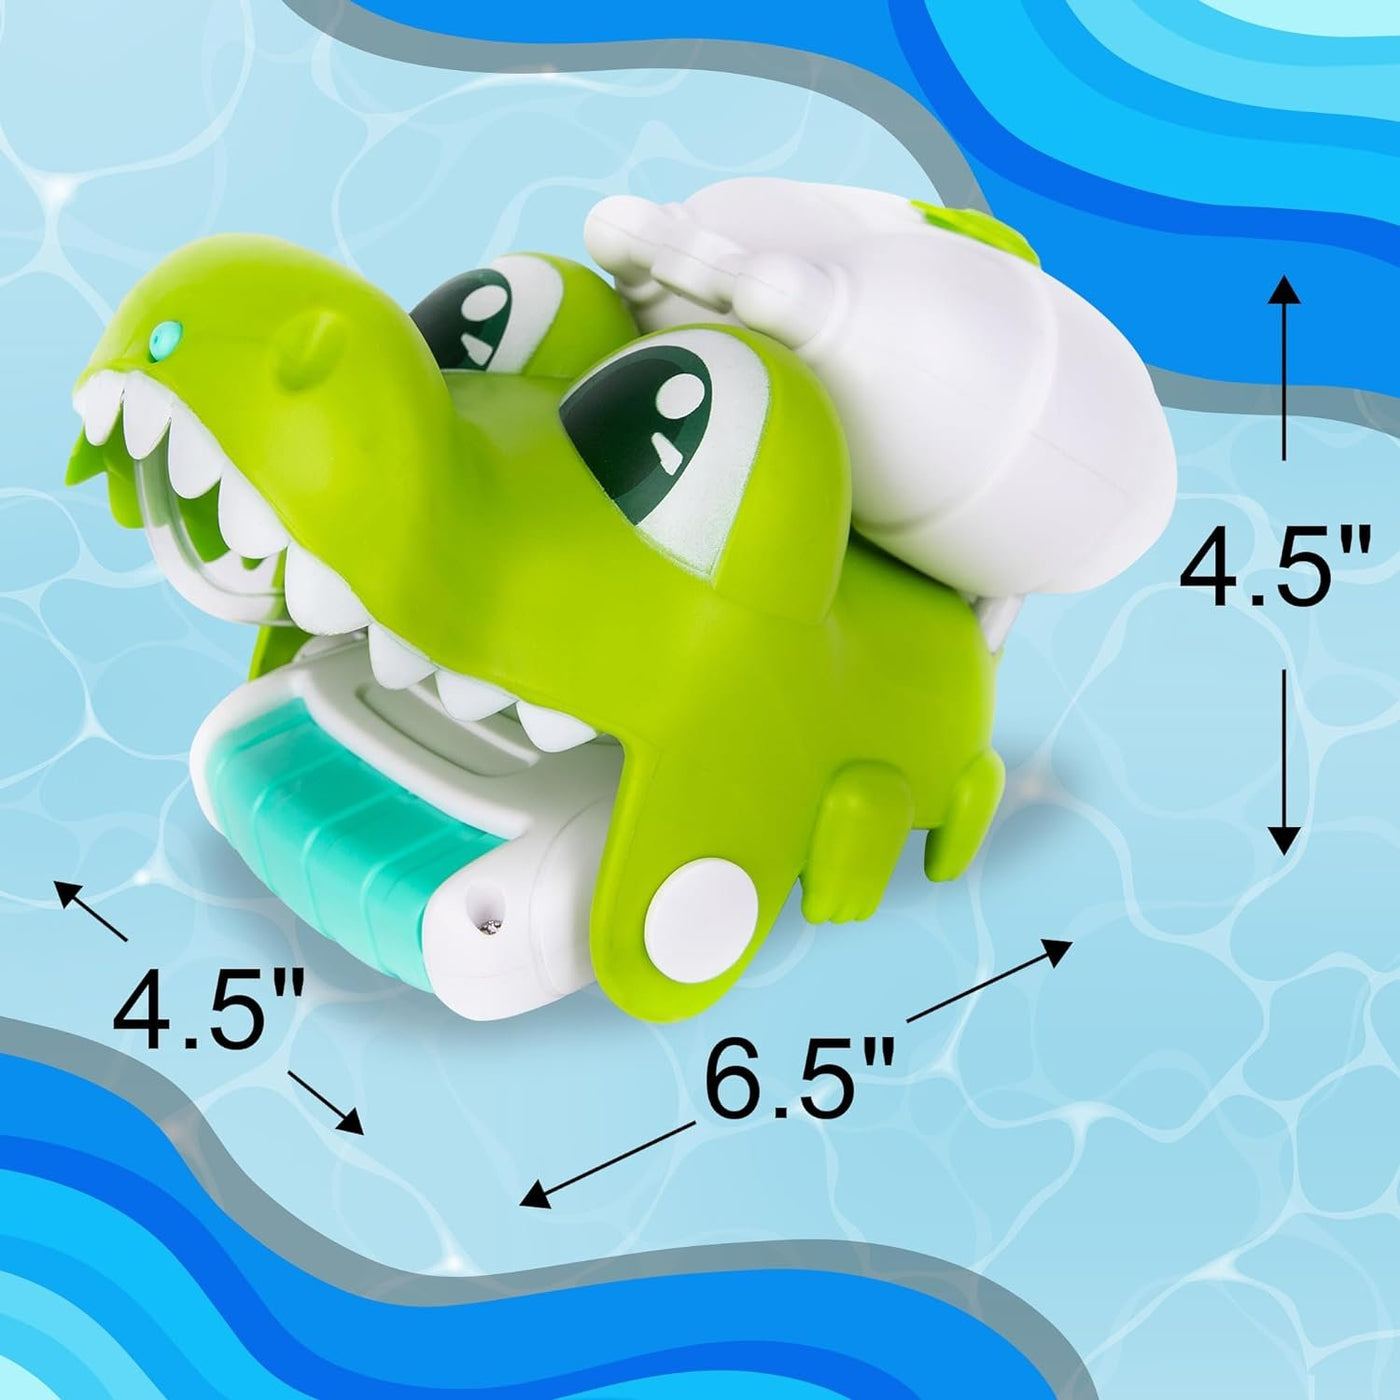 Squirt Toy Wrist Gun - Set of 2 Animal Water Guns - Small Water Guns for Kids - 1 Crocodile and 1 T-Rex Design - Water Squirt Toy for Kids - Squirt Guns for Bath or Outdoor Summer Fun